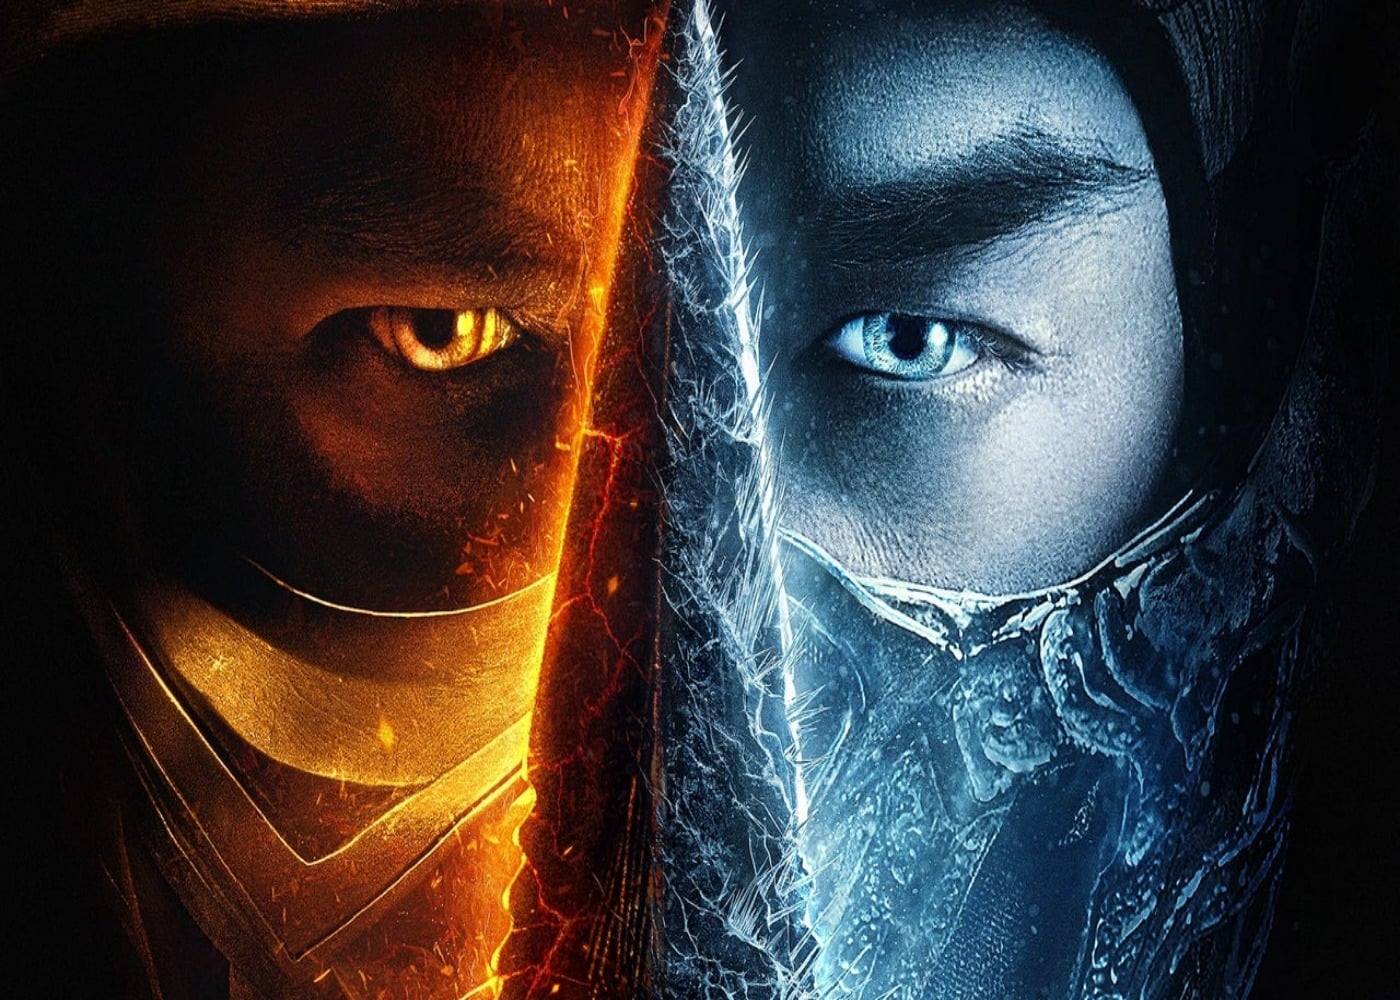 A festival of violence as Mortal Kombat latest movie adaptation at last rivals its game version